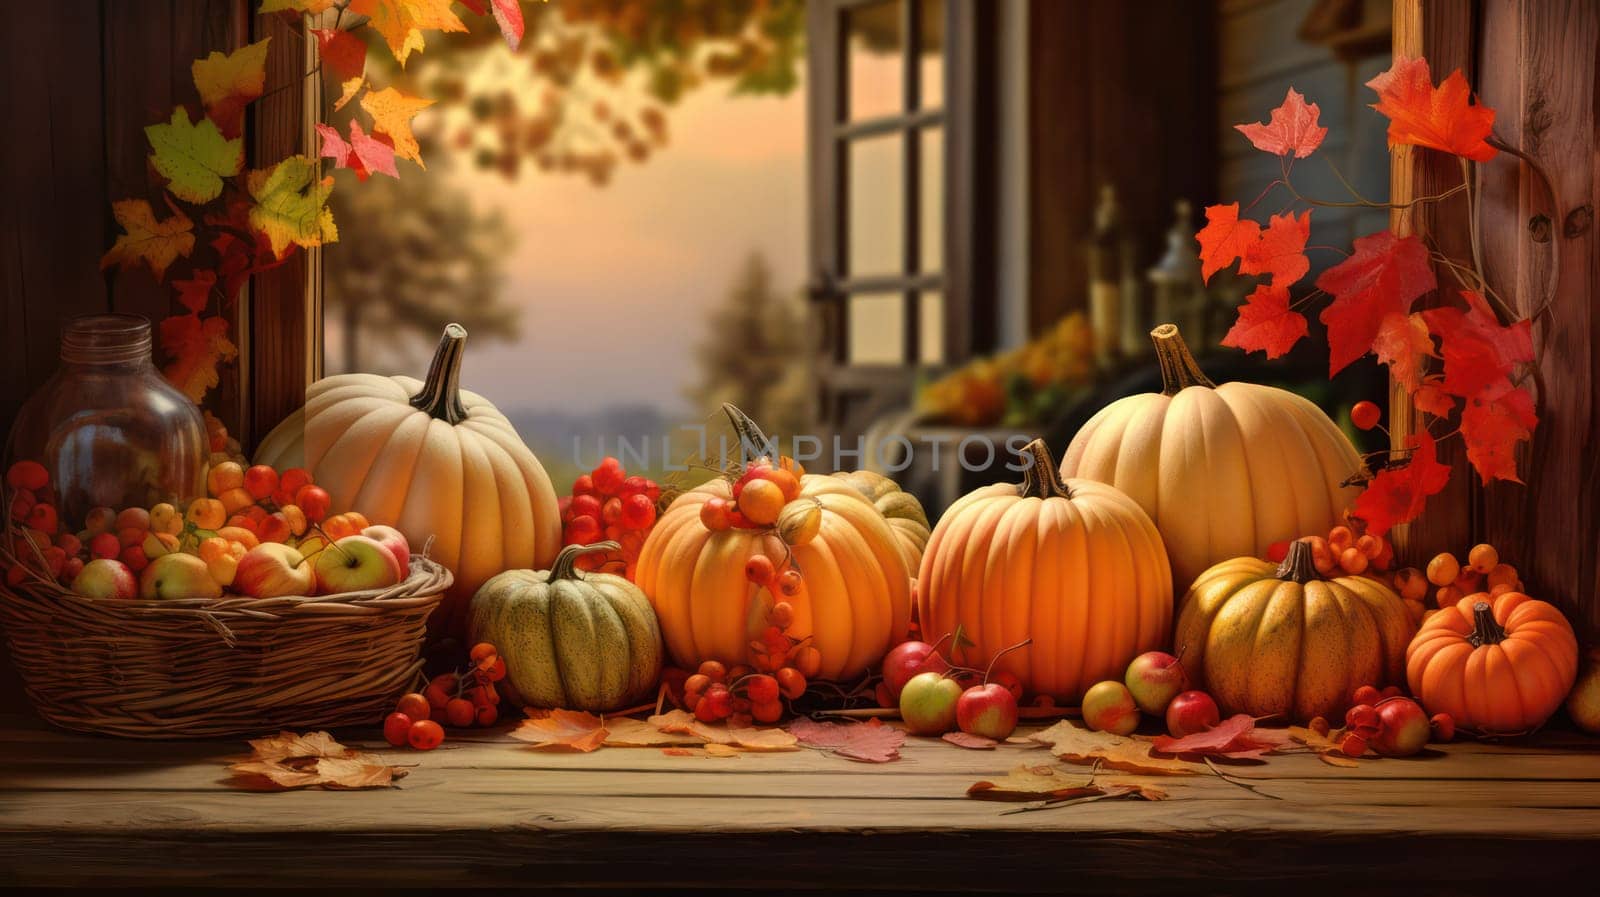 Autumn Harvest: A Spooky Pumpkin Patch on a Rustic Wooden Table with Colorful Leaves. by Vichizh